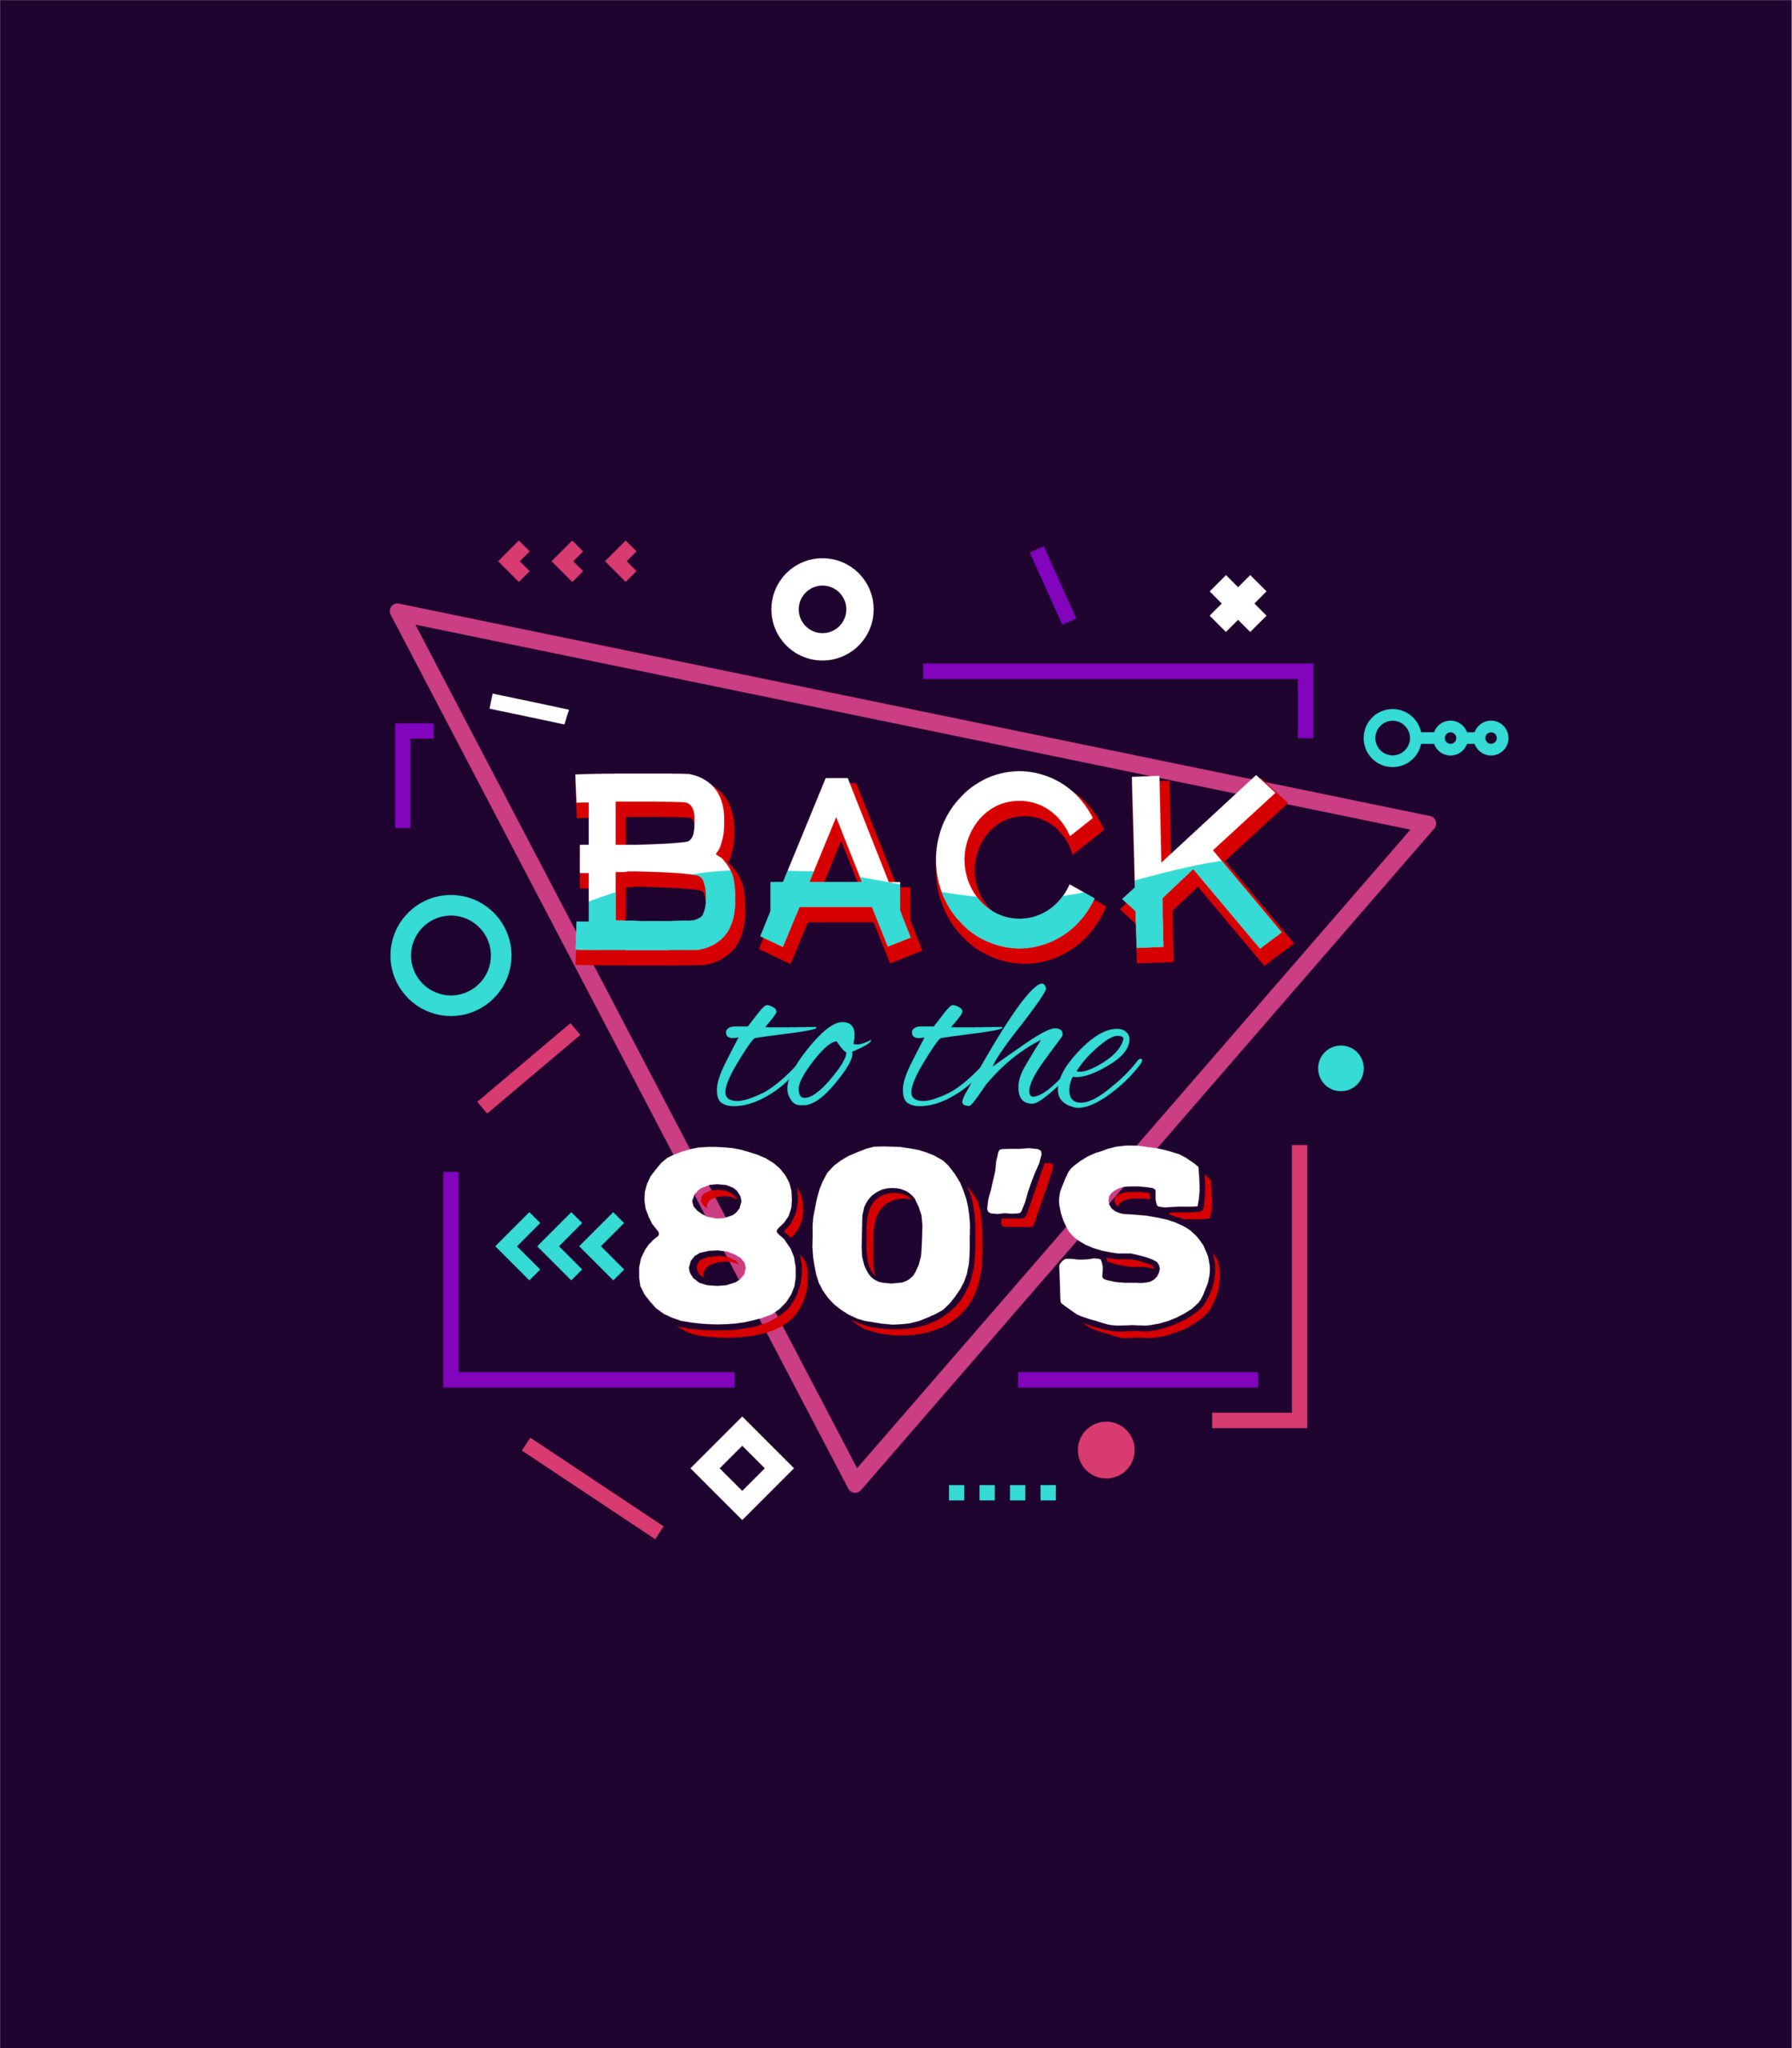 Retro style back to eighties print for T-shirt or other uses. Vintage neon 80's or 90's text. Purple and pink colors, abstract shapes.